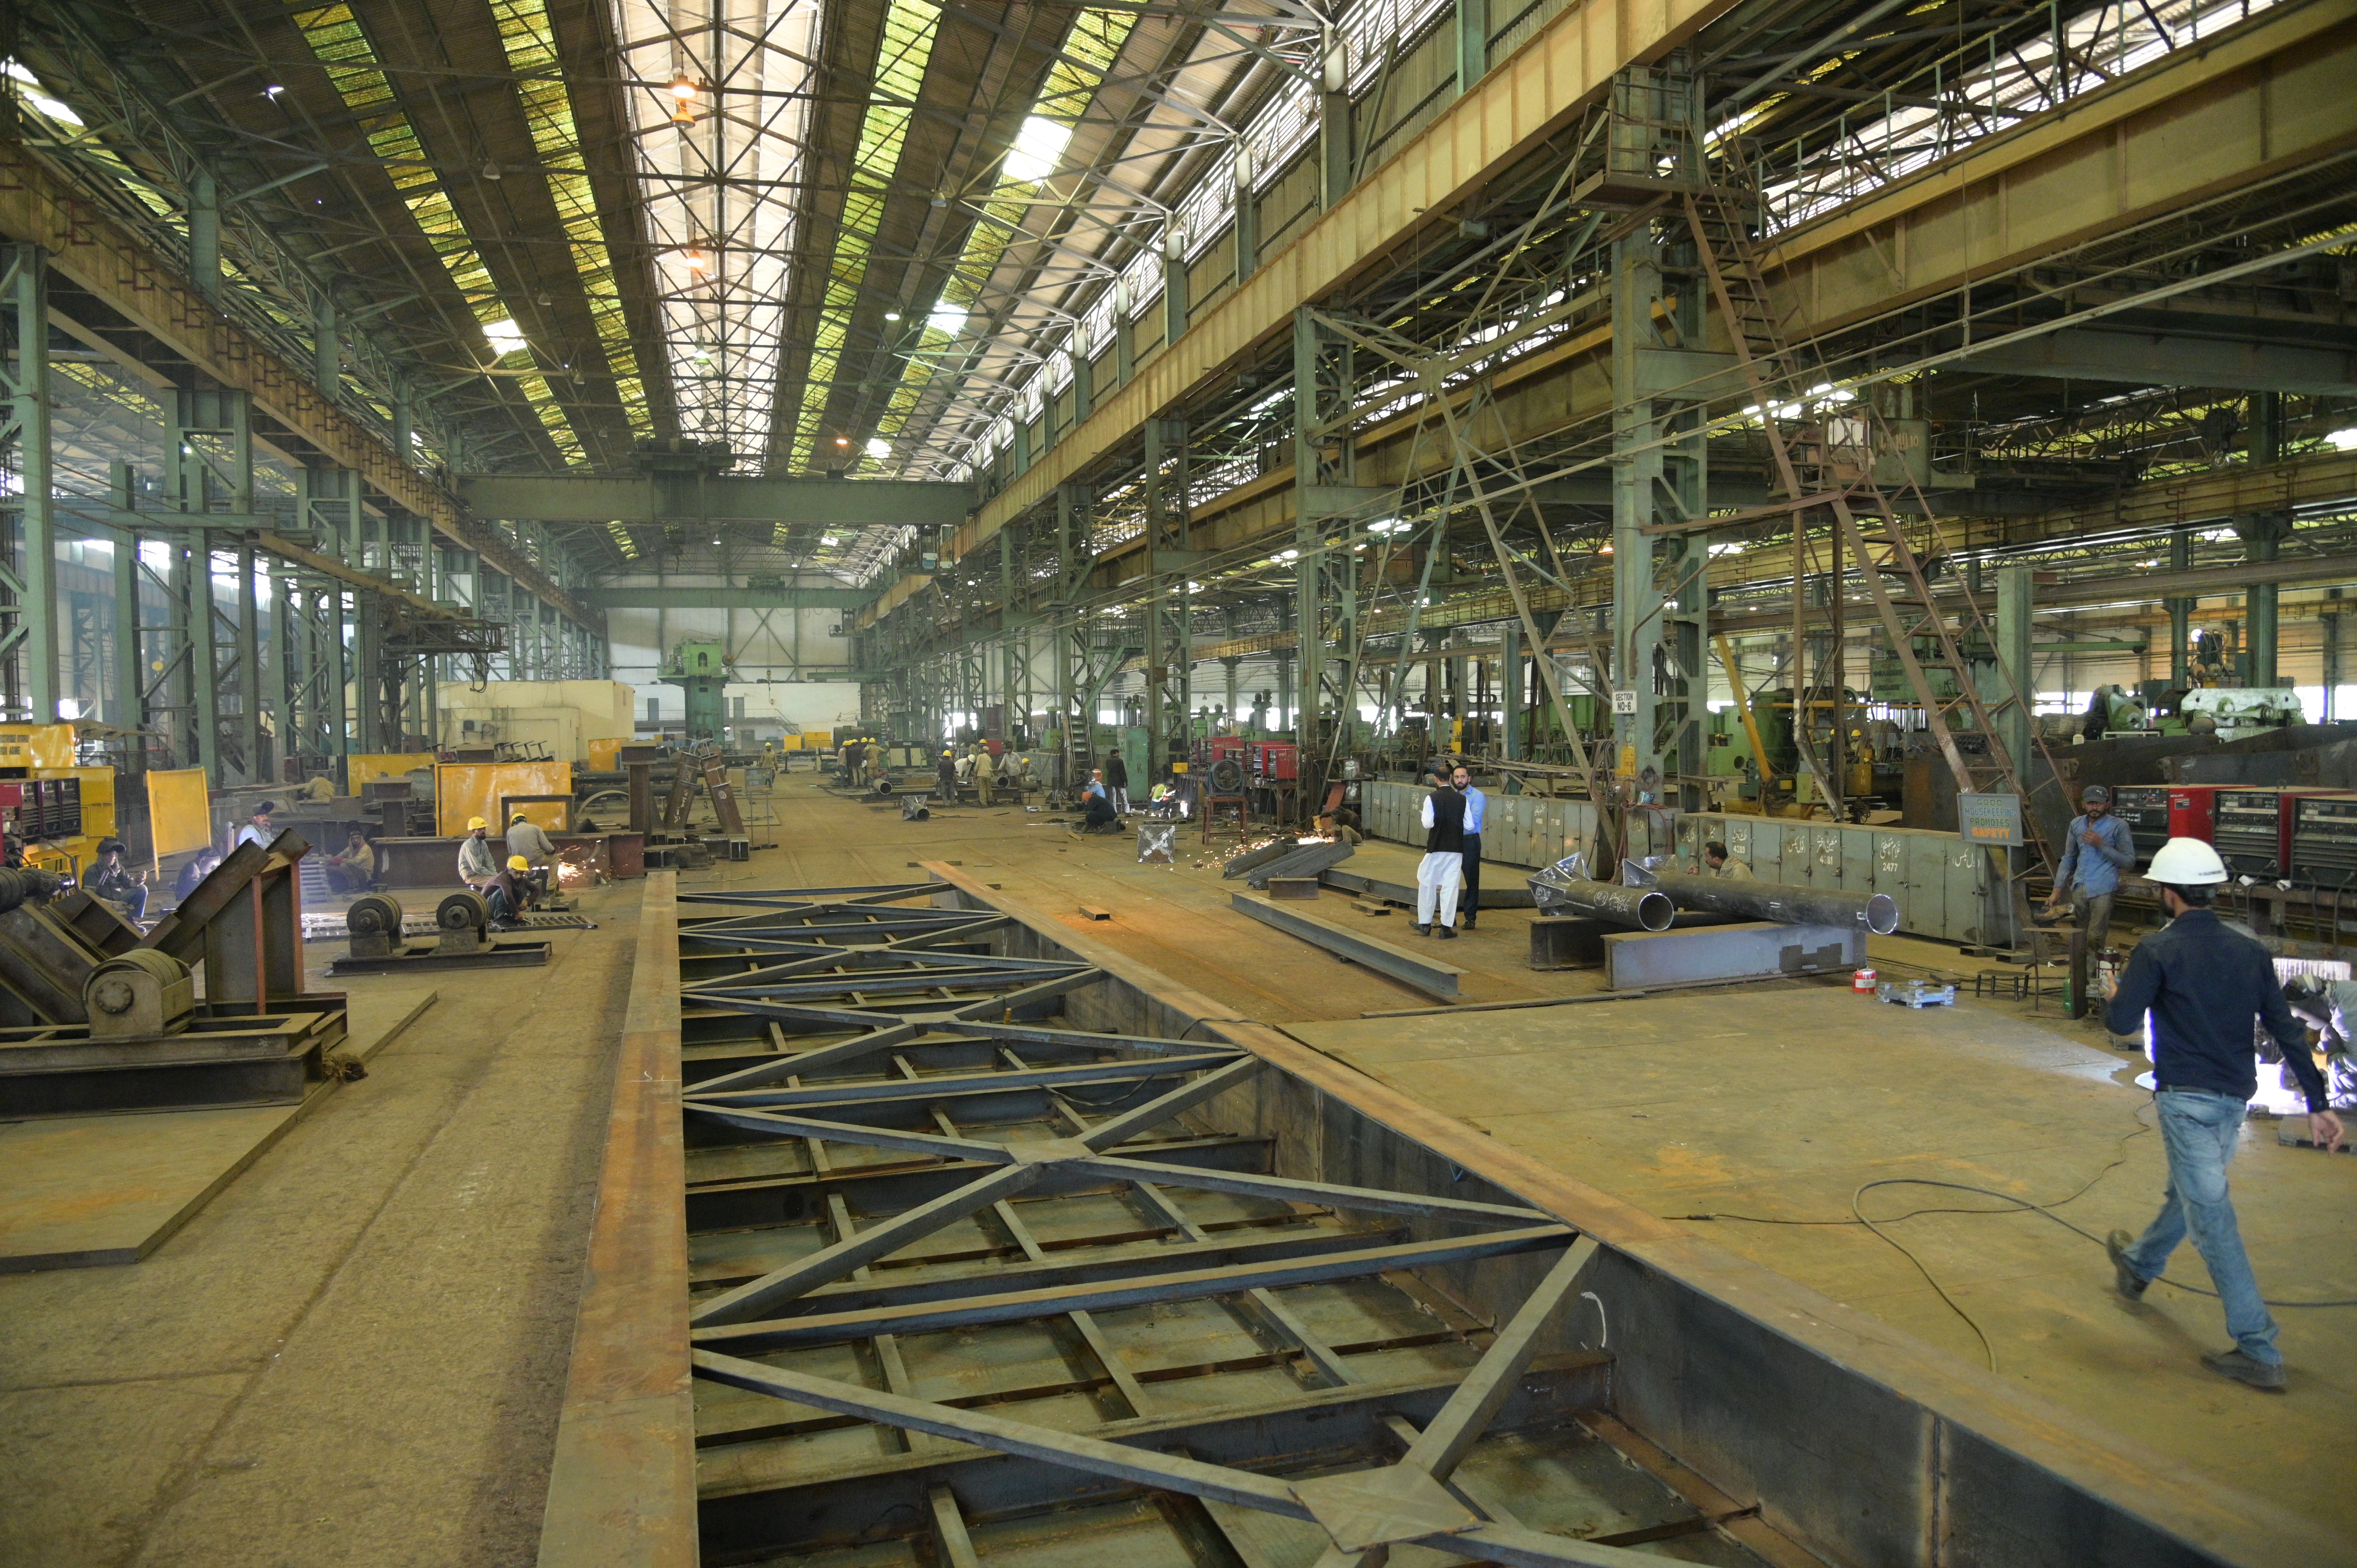 The interior view of HMC industry